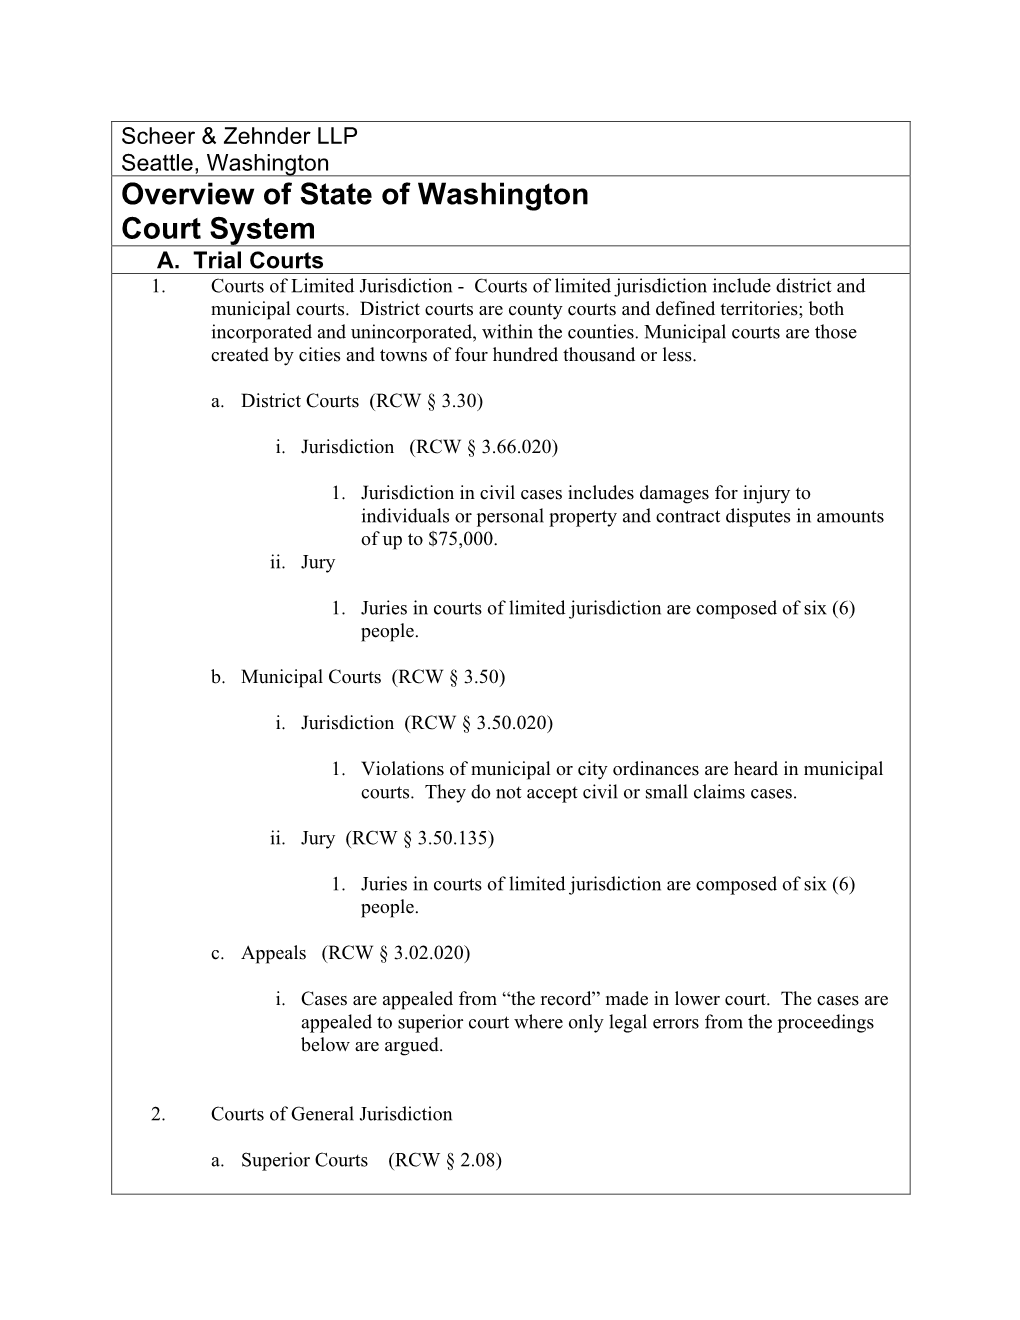 Overview of State of Washington Court System A